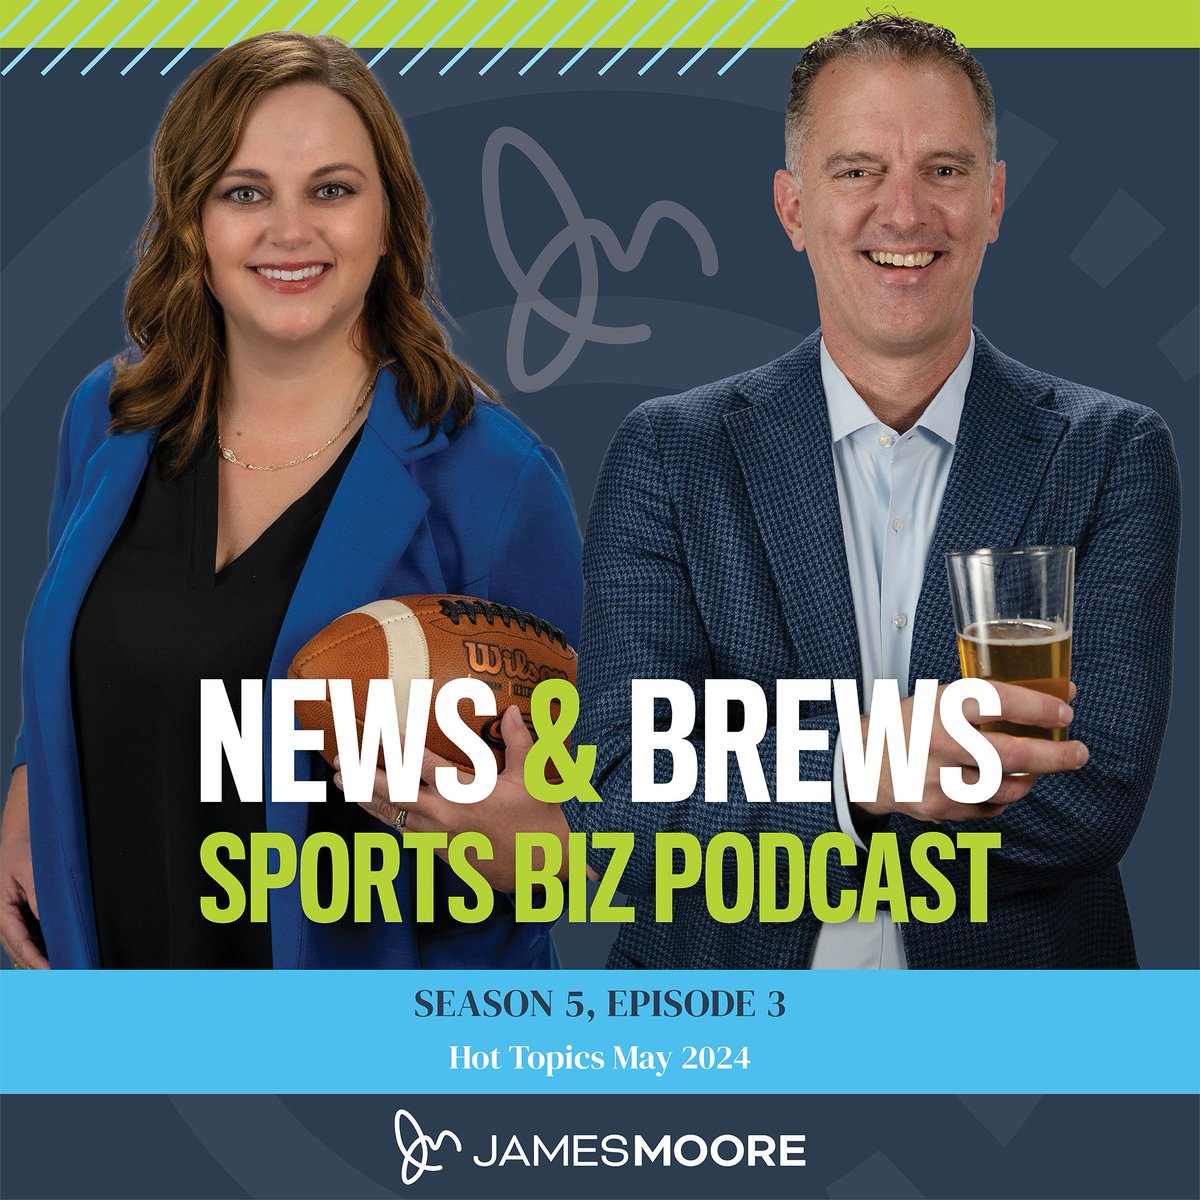 NEWS & BREWS #SPORTSBIZ drops TODAY! @KatieDavisCPA and @KenKurdzielCPA and Shane Metzler (@shmetzler) discuss NCAA #AUP guide updates, NIL law changes and private equity investments in sports. Tune in at 4:30 pm ET/1:30 pm PT! #HigherEd bit.ly/NnBMay2024